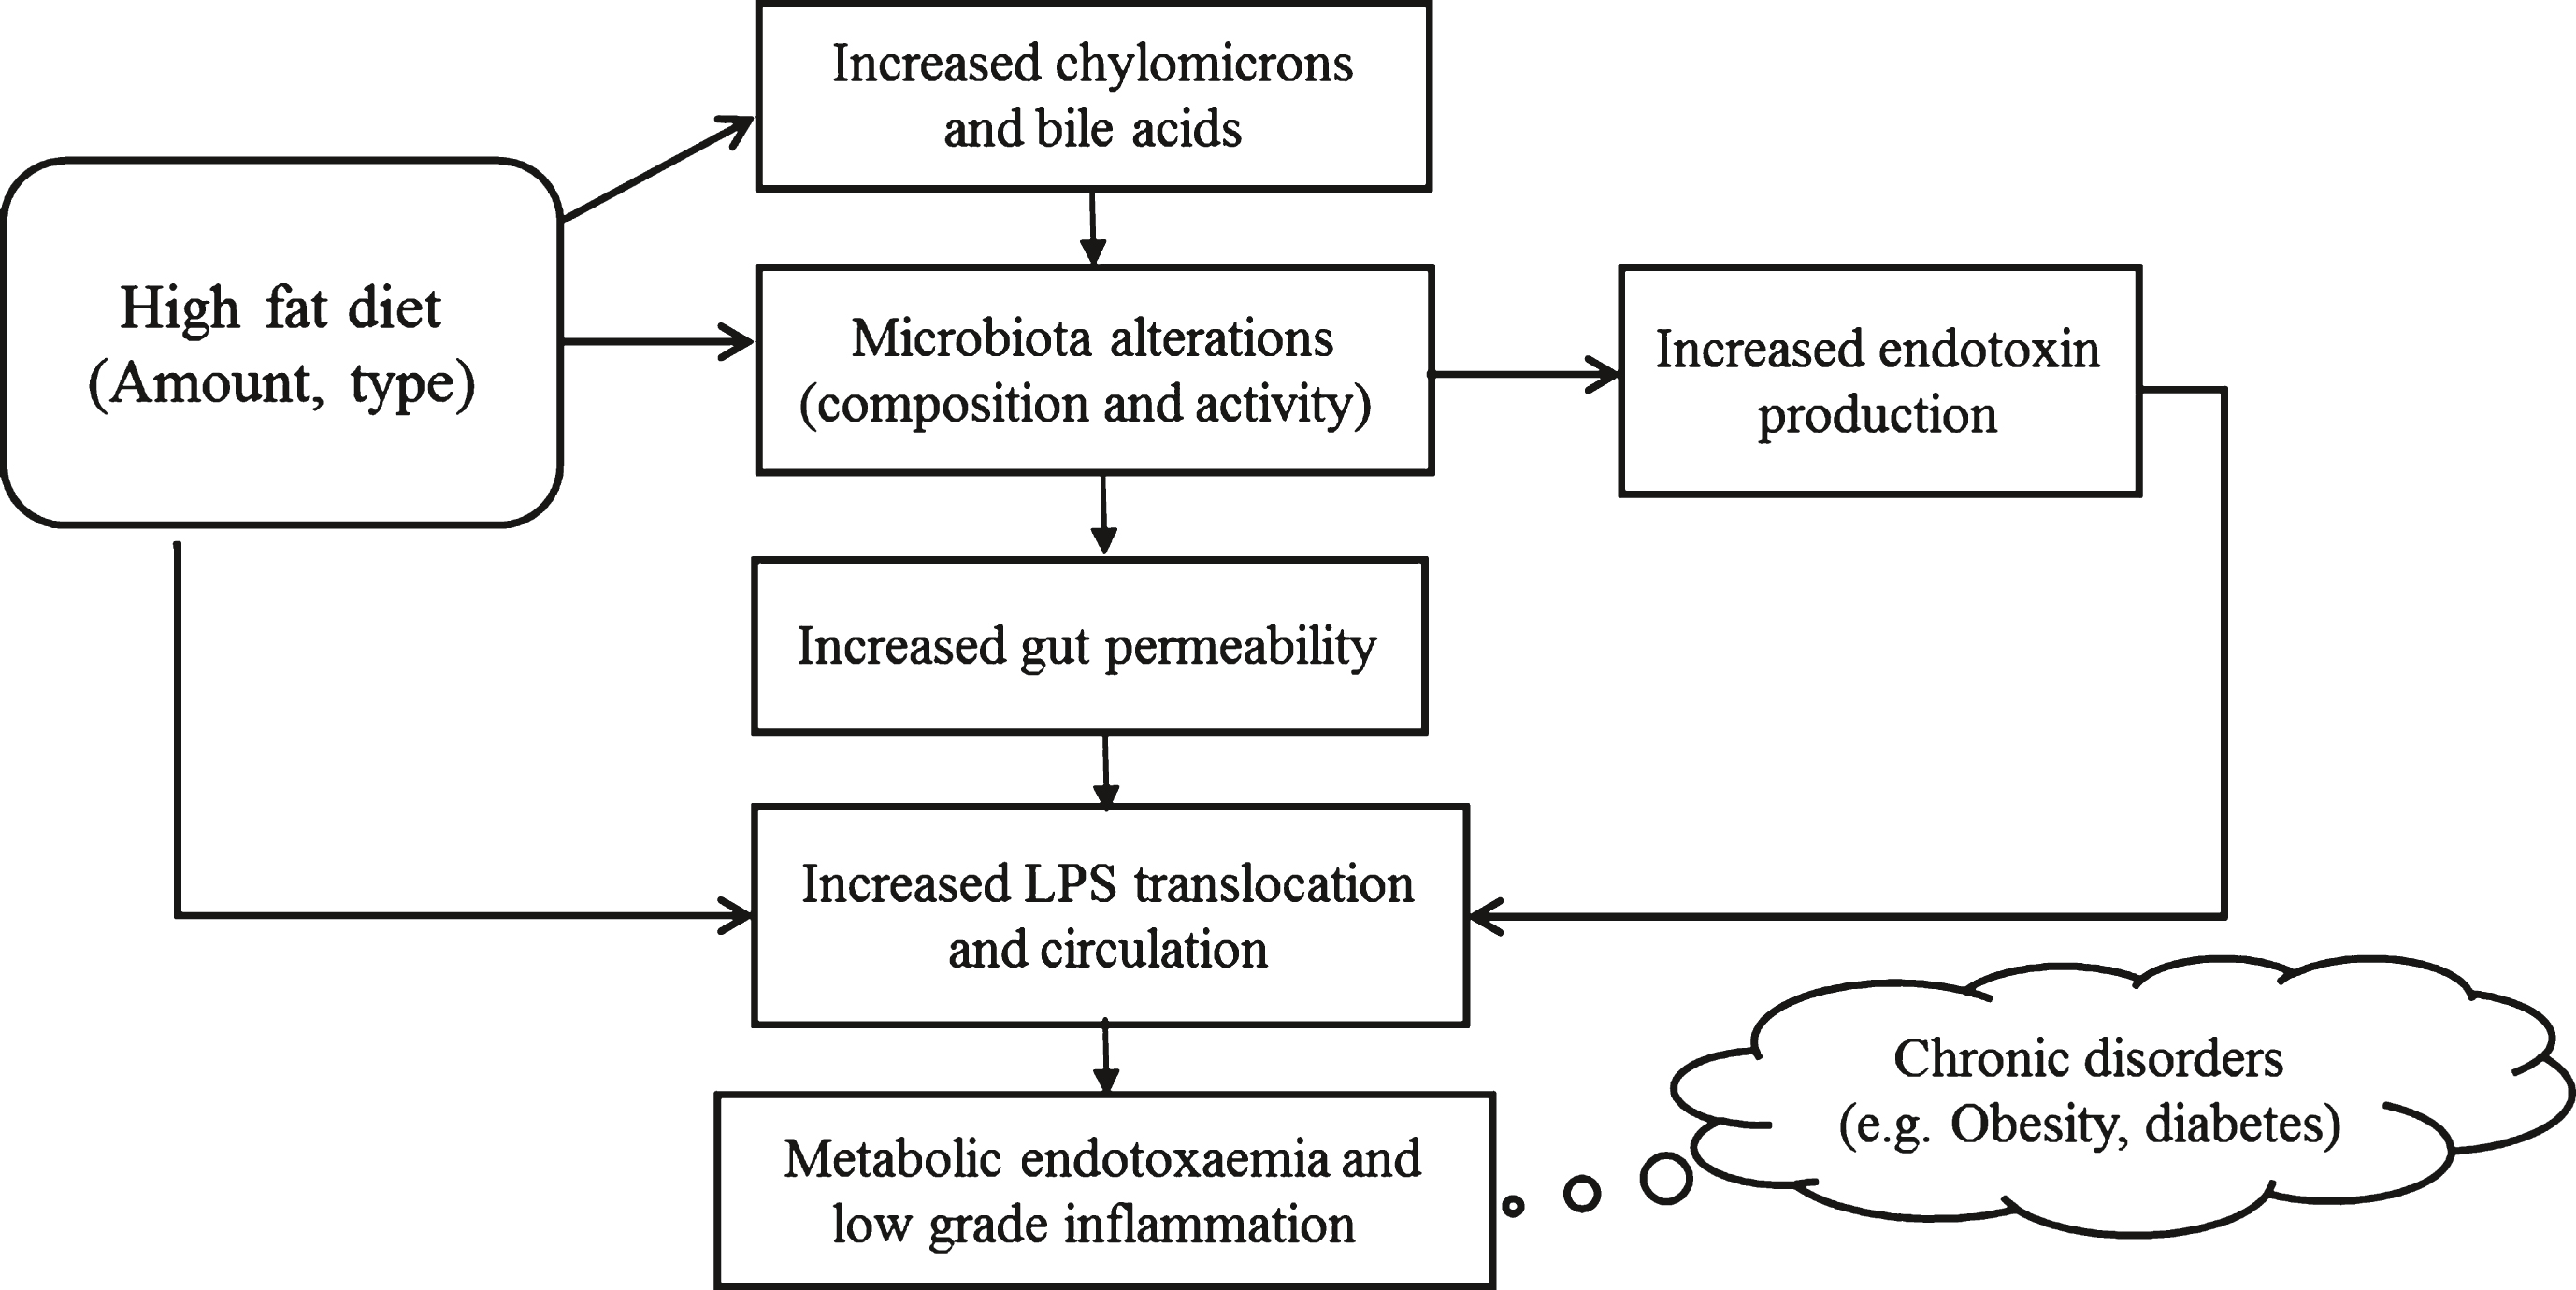 Relationship between a high fat diet, microbiota composition and metabolic endotoxaemia. LPS, lipopolysaccharide. Adapted from [155].